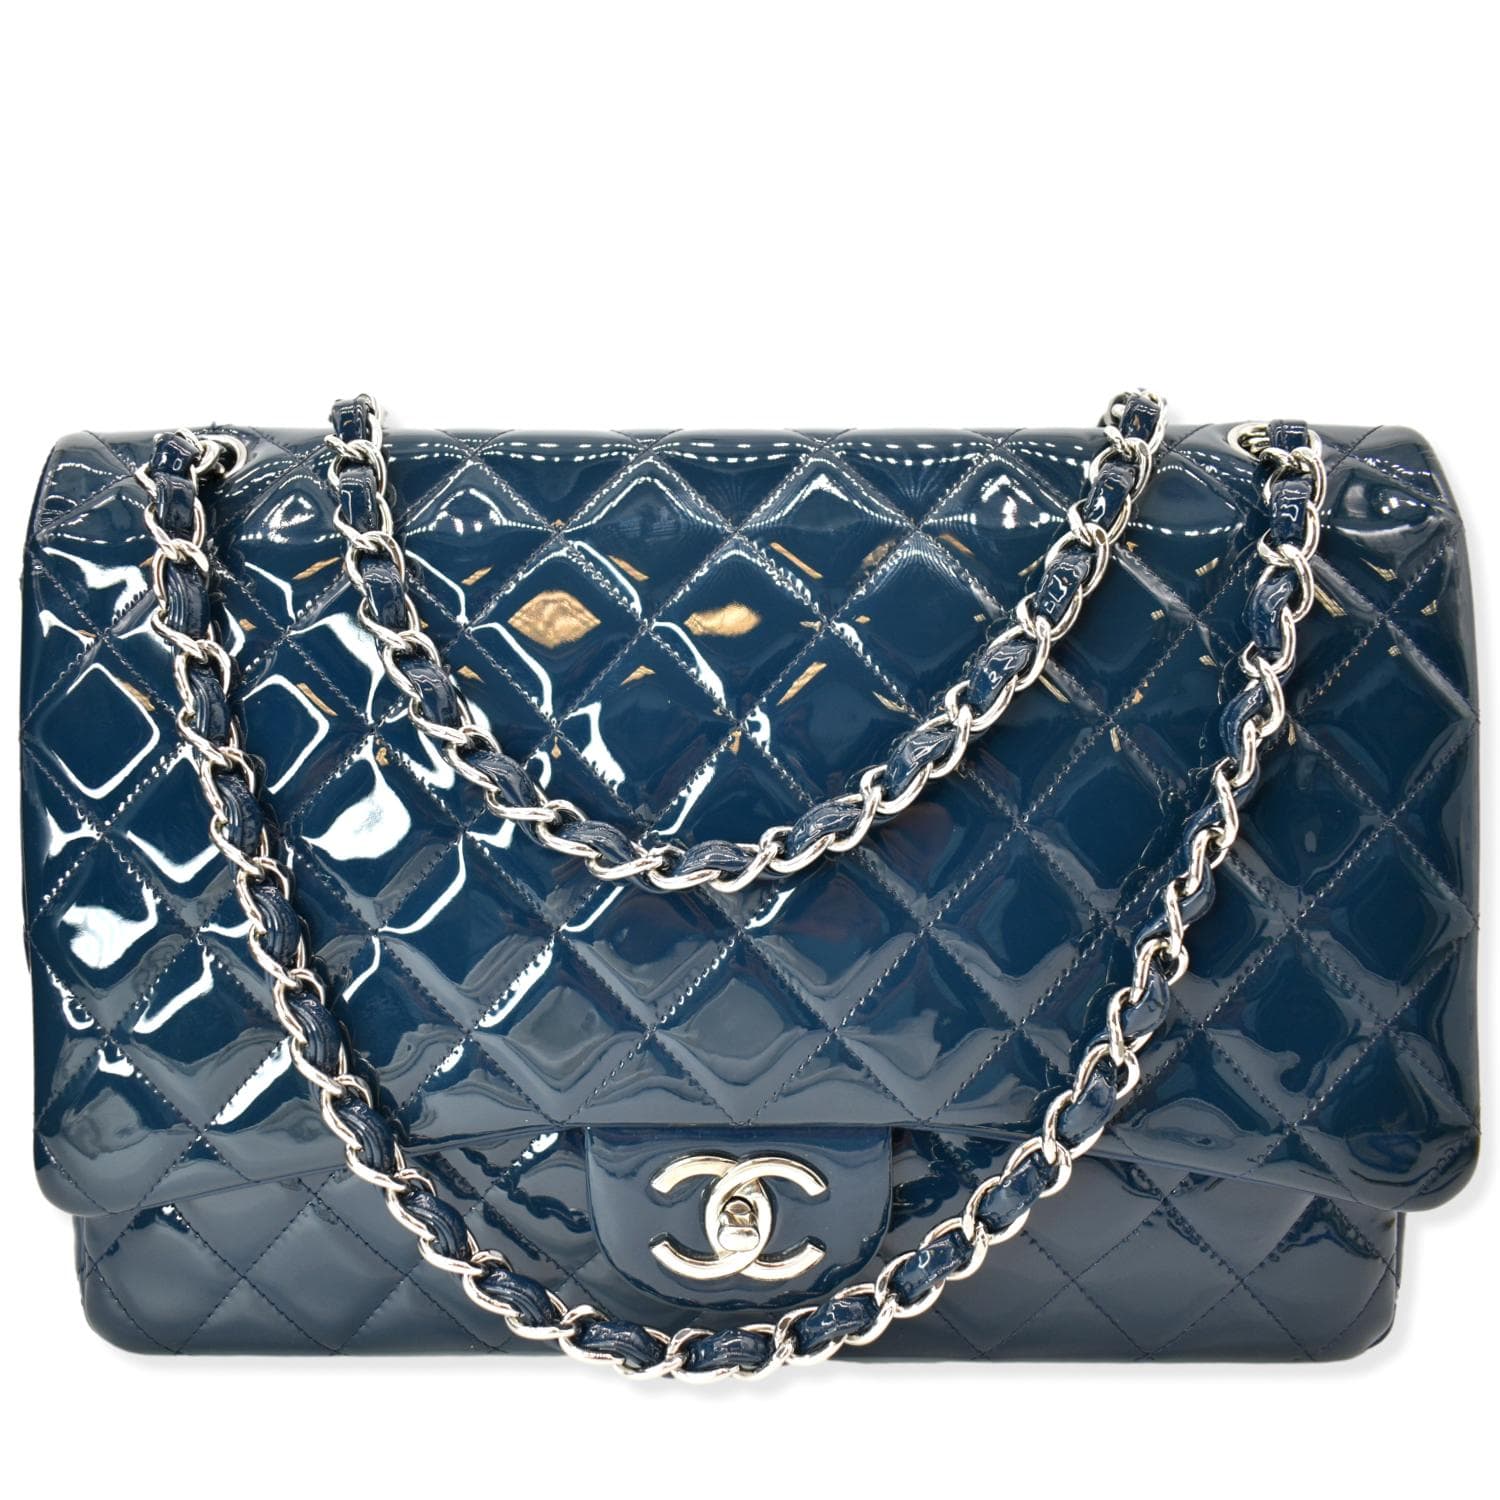 HealthdesignShops, Blue Quilted Patent Leather Classic Medium Double Flap  Bag